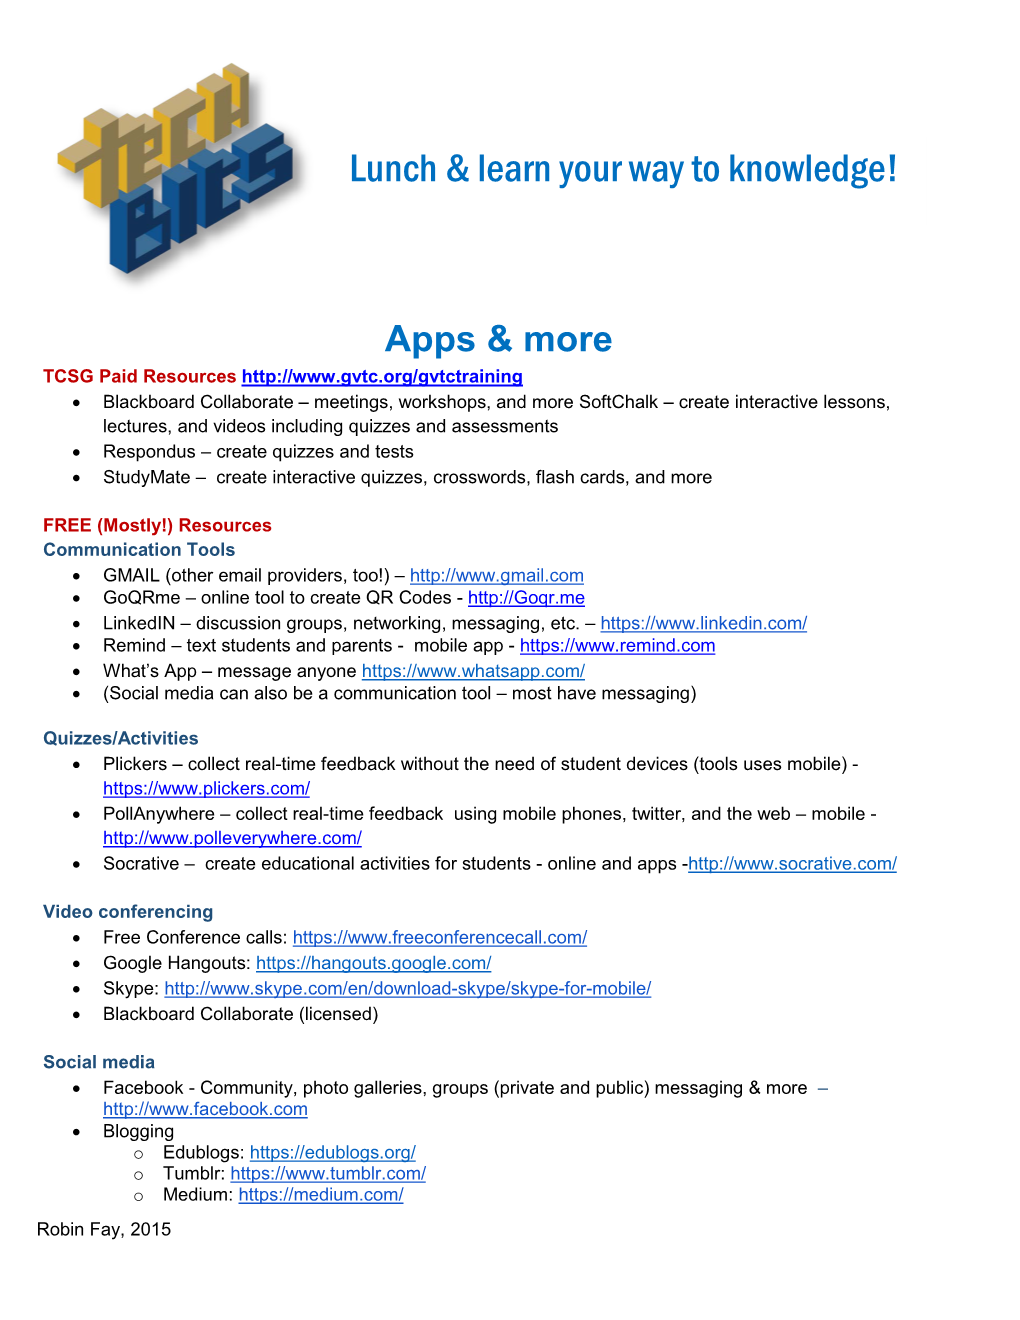 Lunch & Learn Your Way to Knowledge!